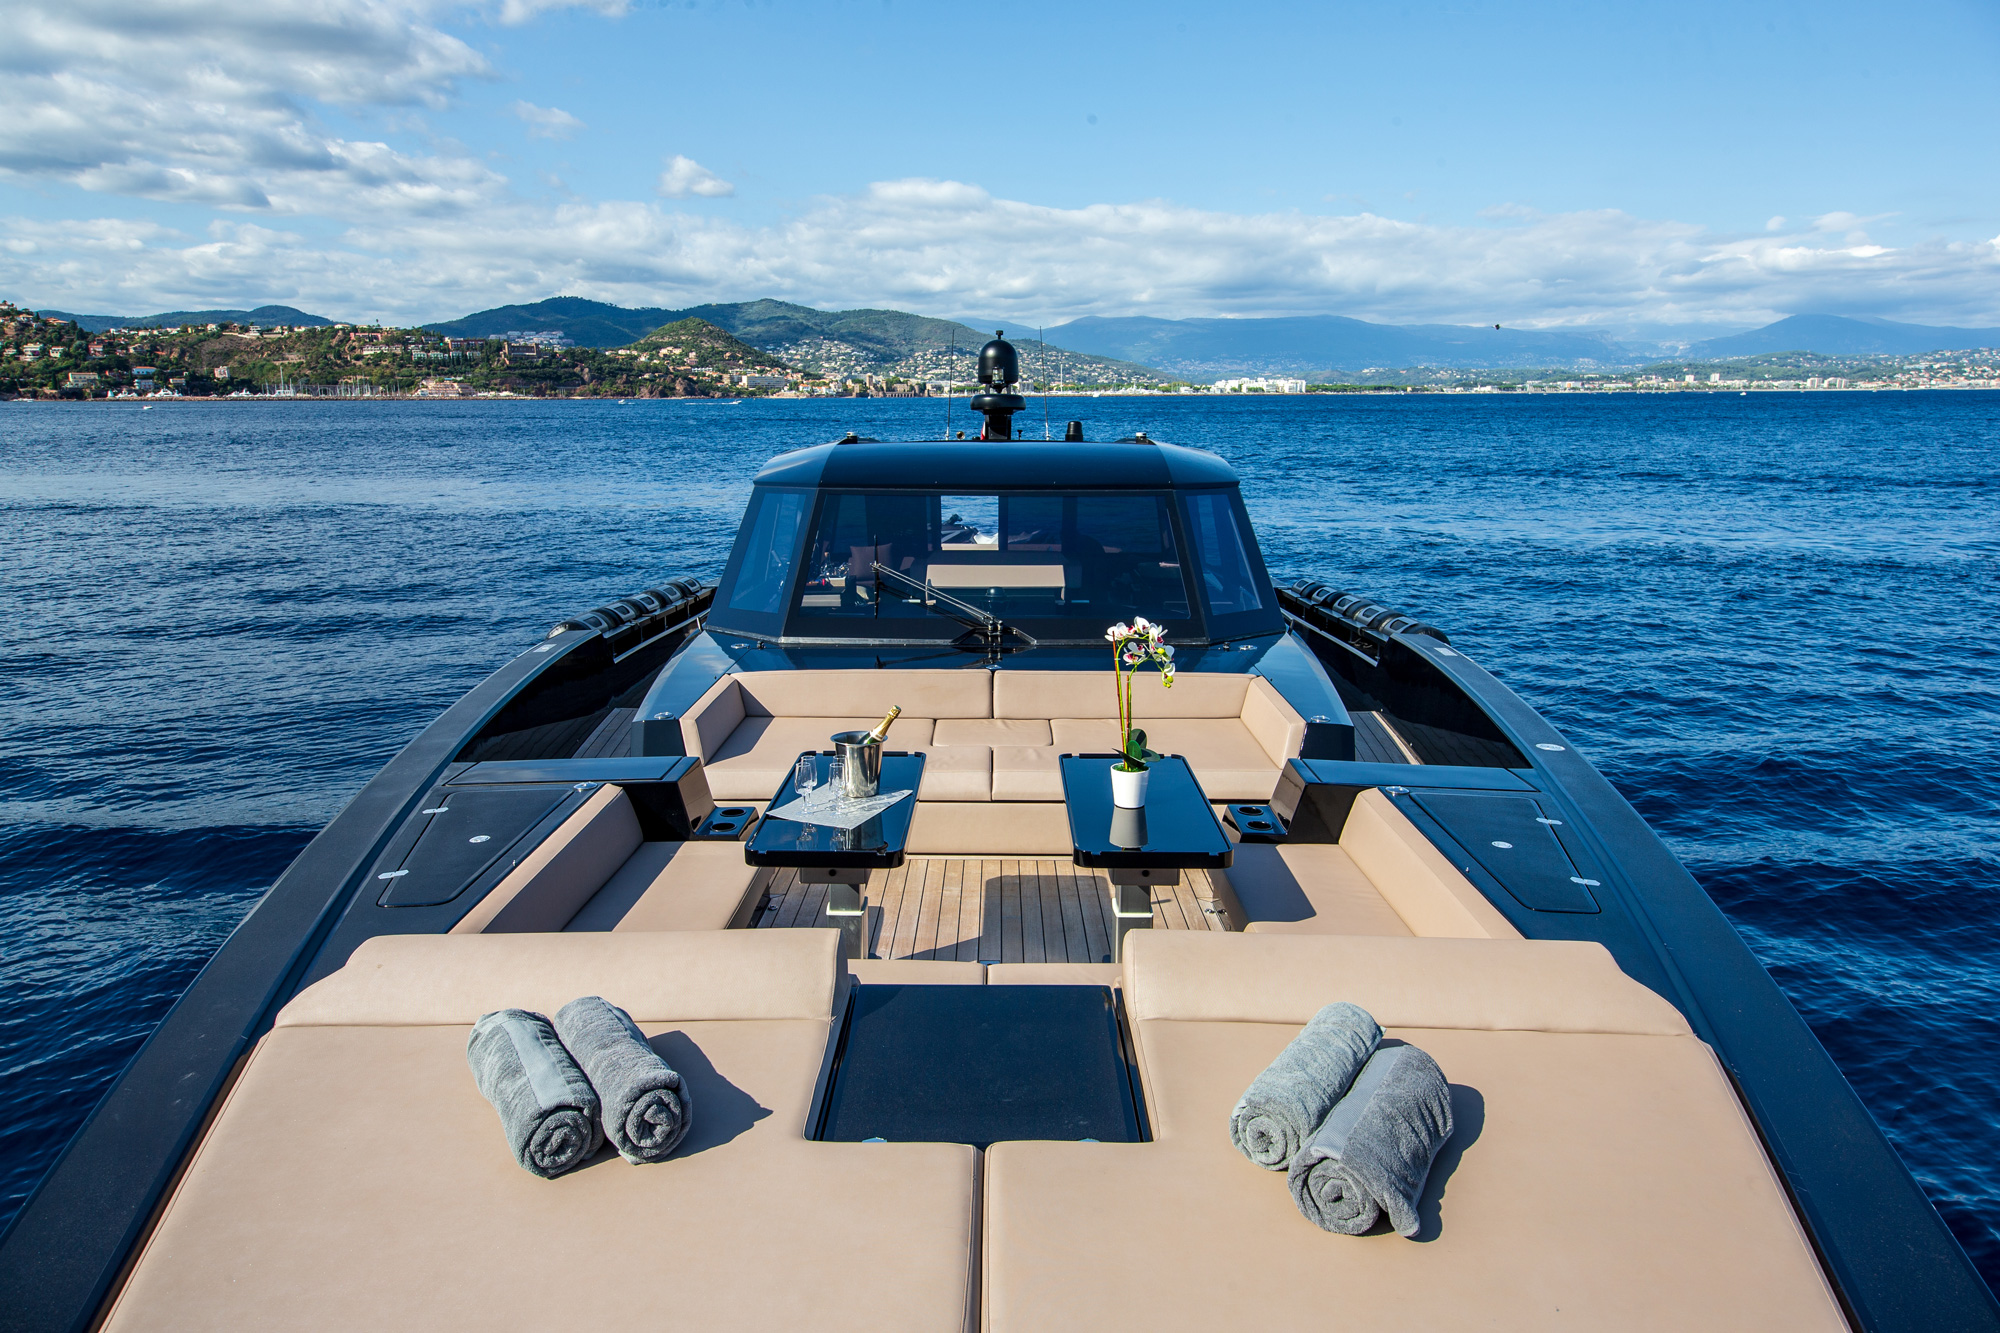 Accessories for yachts &amp; villas supplies